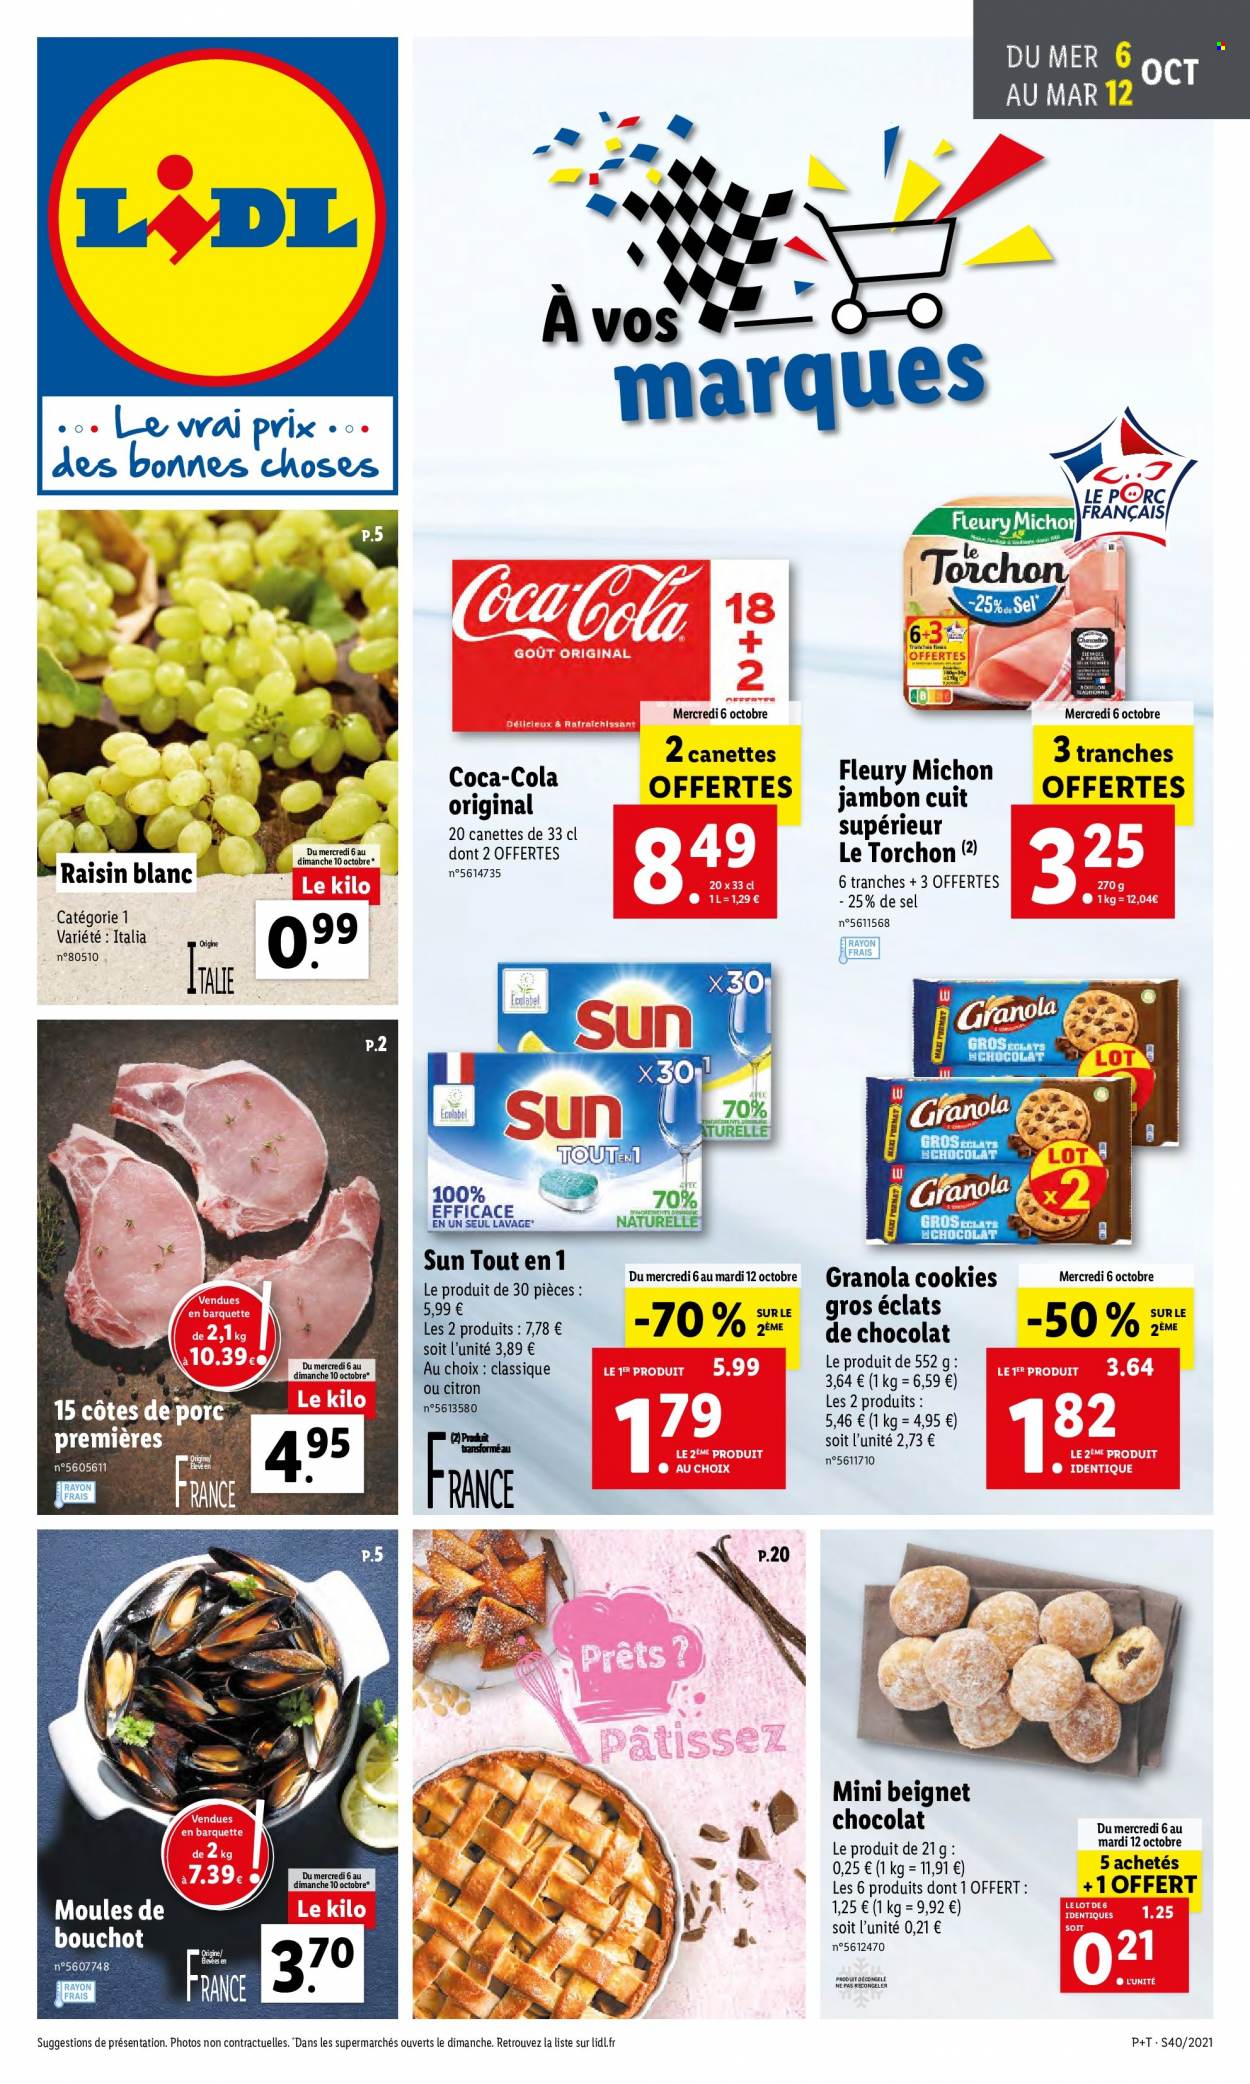 Catalogue Lidl - 06.10.2021 - 12.10.2021. Page 1.